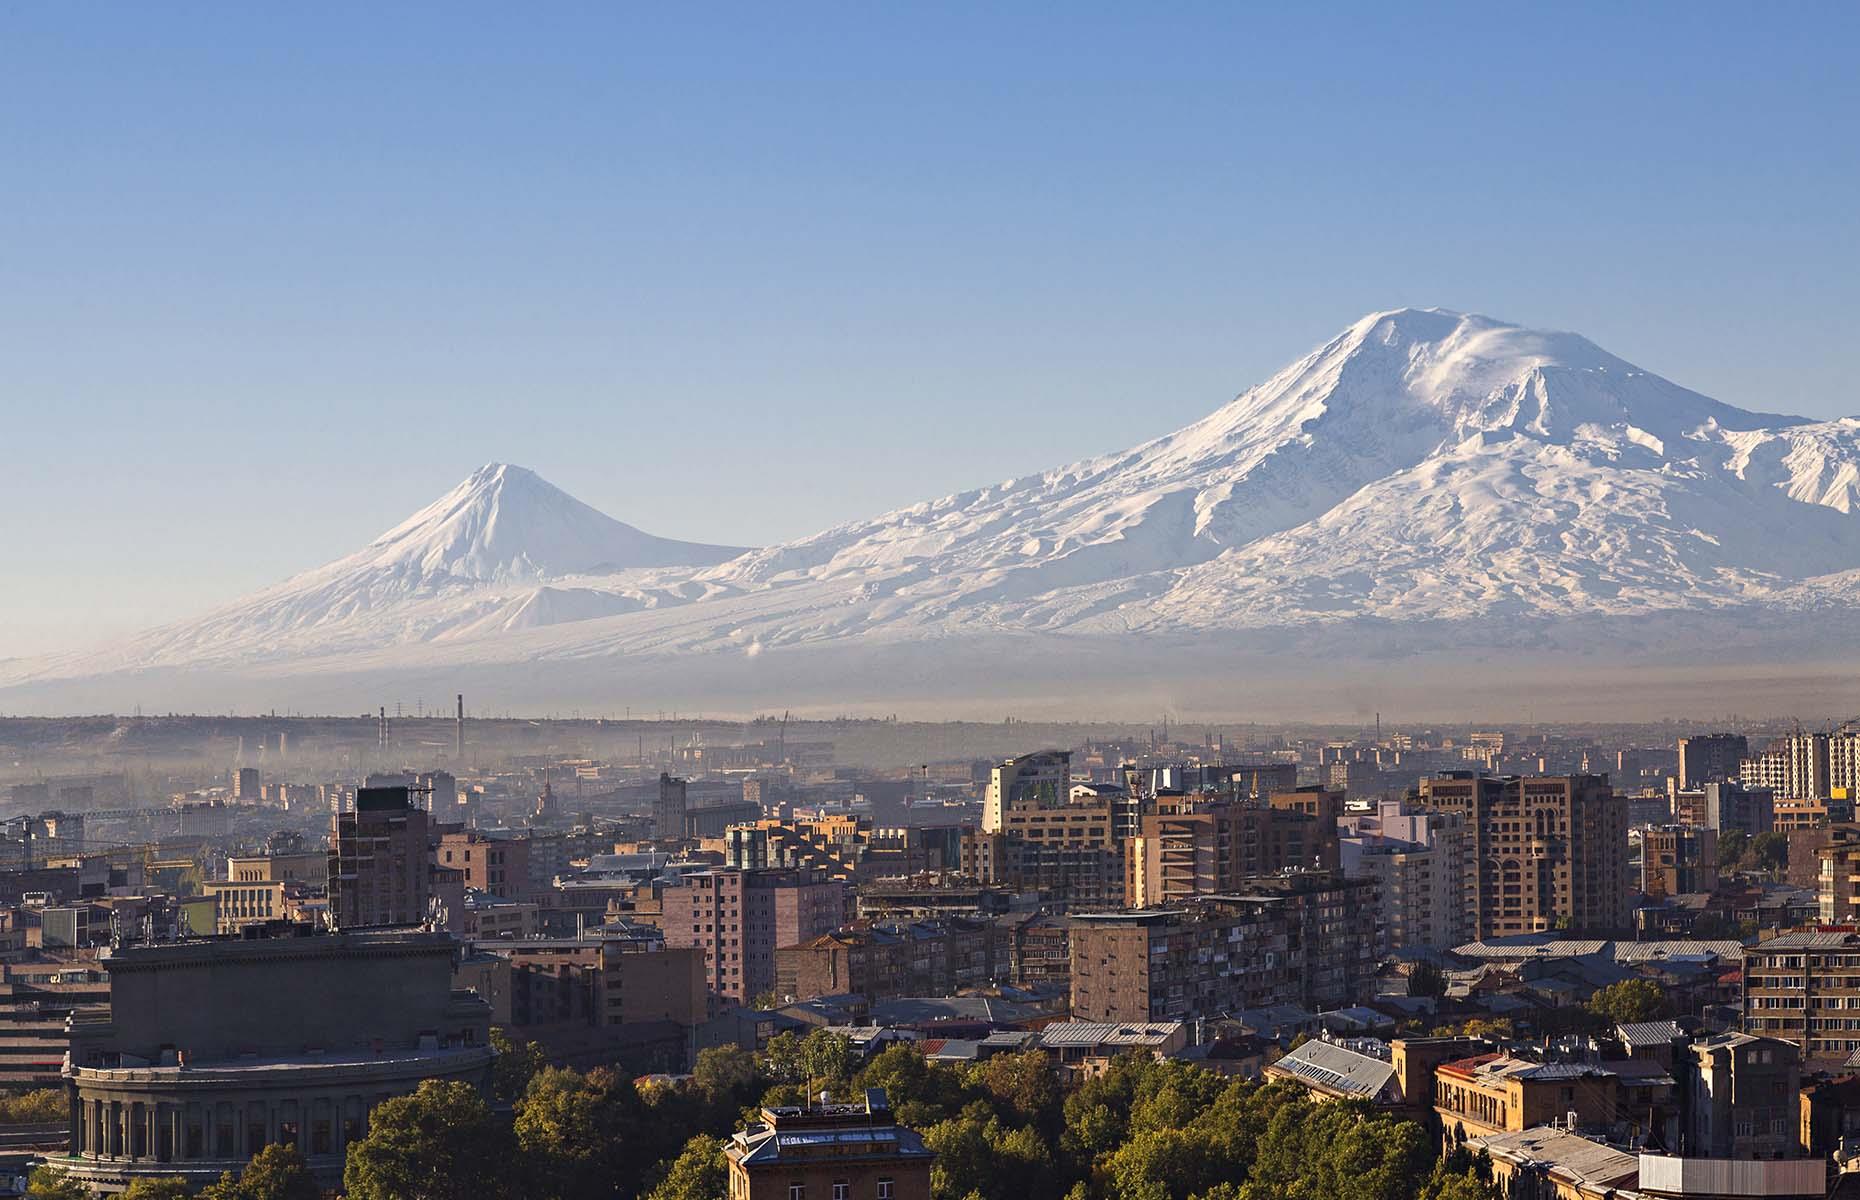 <p>The capital of Armenia is one of Europe's least-known cities and all the more intriguing for it. Its skyline is dominated by Mount Ararat, the symbol of Armenia. Visitors can climb to the top of The Cascade stairway for spectacular city and mountain views or meander through the narrow lanes of the old quarter before seeking out somewhere to try khoravats (traditional barbecued meat). A harrowing but important visit is <a href="http://www.genocide-museum.am/eng/index.php">The Armenian Genocide Museum</a> and its moving memorial.</p>